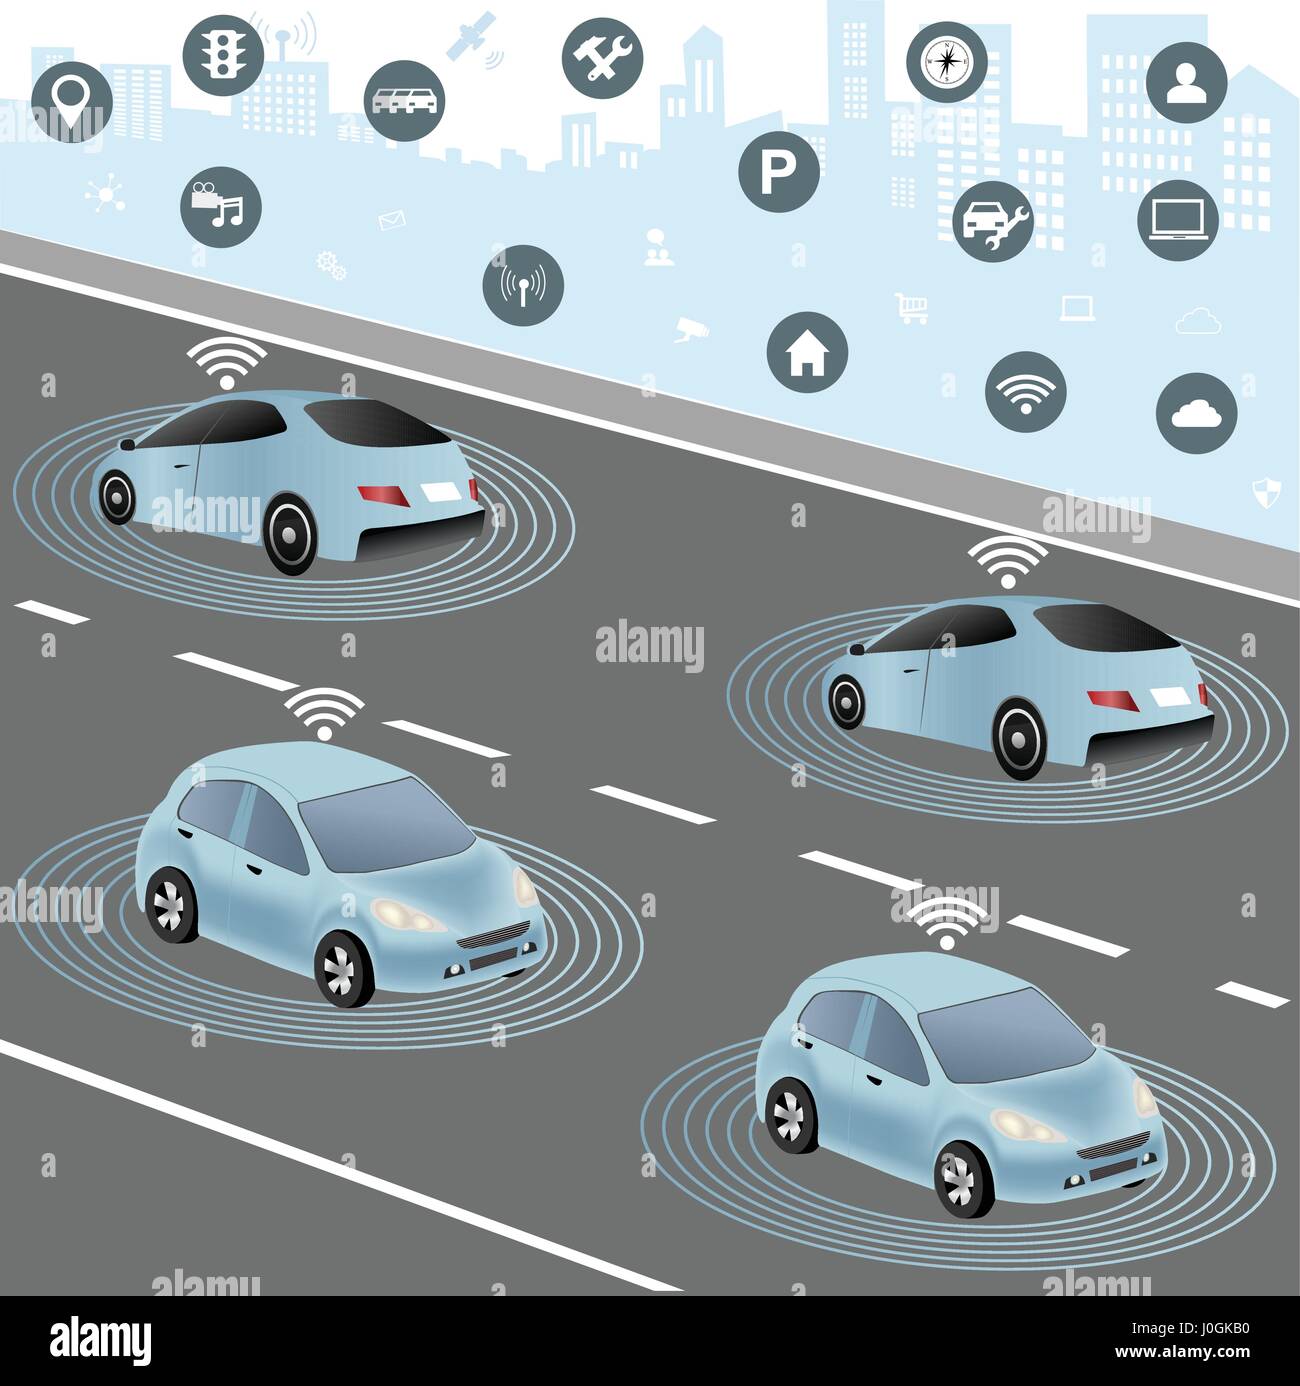 Communication that connects cars to devices on the road, such as traffic lights, sensors, or Internet gateways. Wireless network of vehicle. Smart Car Stock Vector